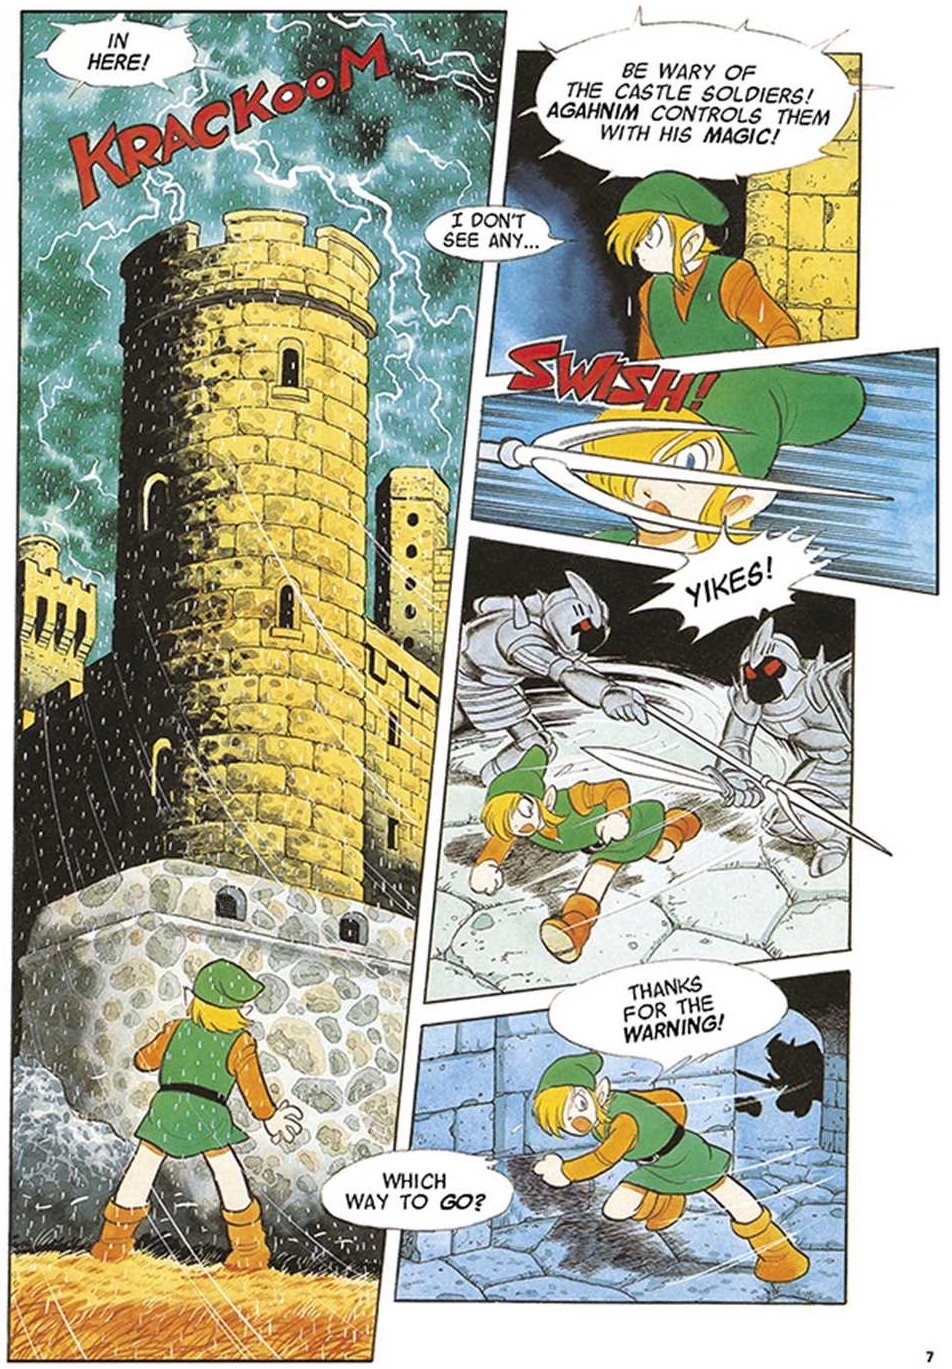 Link enters Hyrule Castle in panels from the first installment of Shotaro Ishinomori's A Link To The Past comic